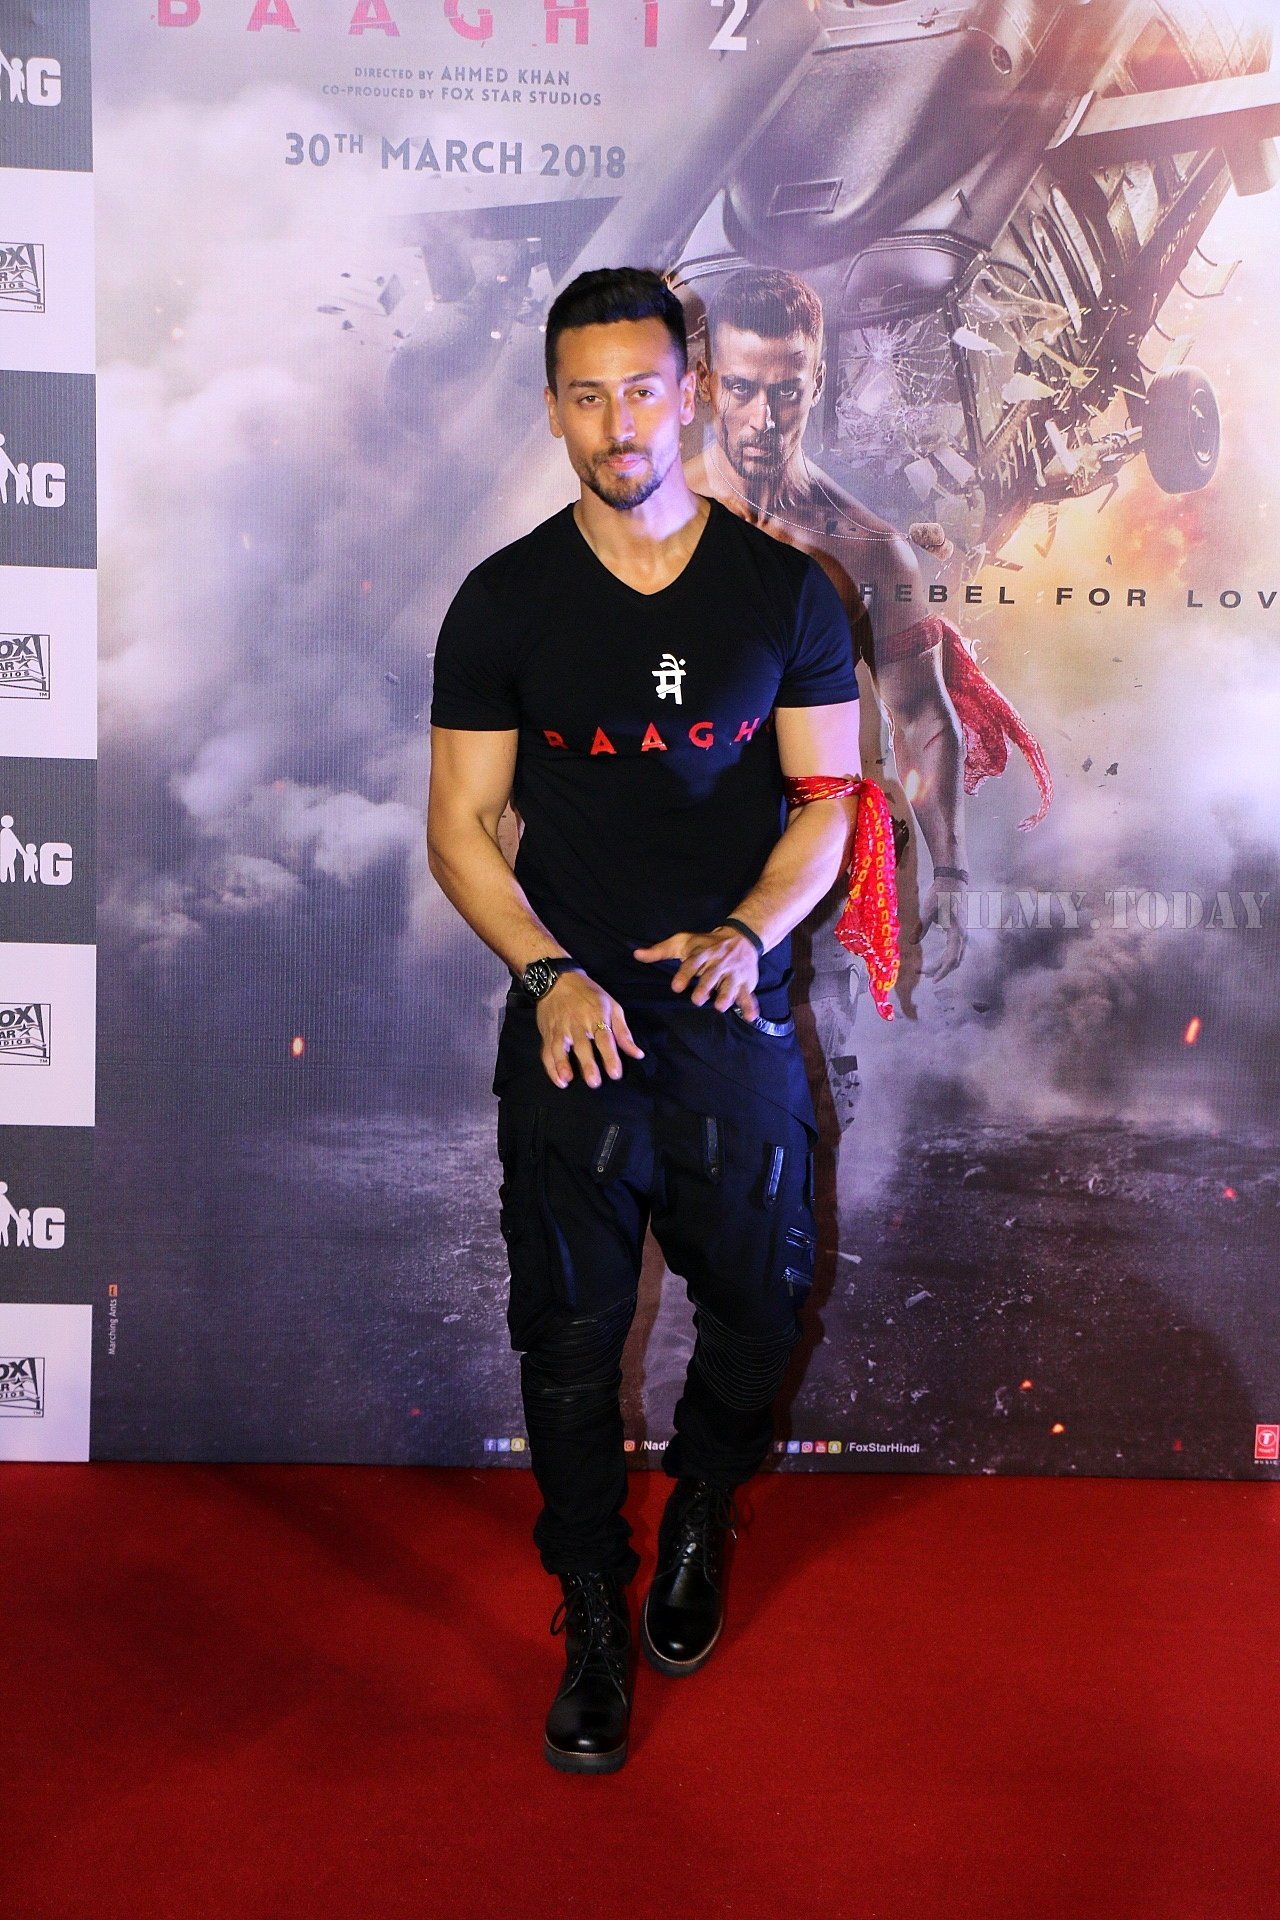 Photos: Trailer Launch Of Film Baaghi 2 With Tiger Shroff & Disha Patani | Picture 1568161